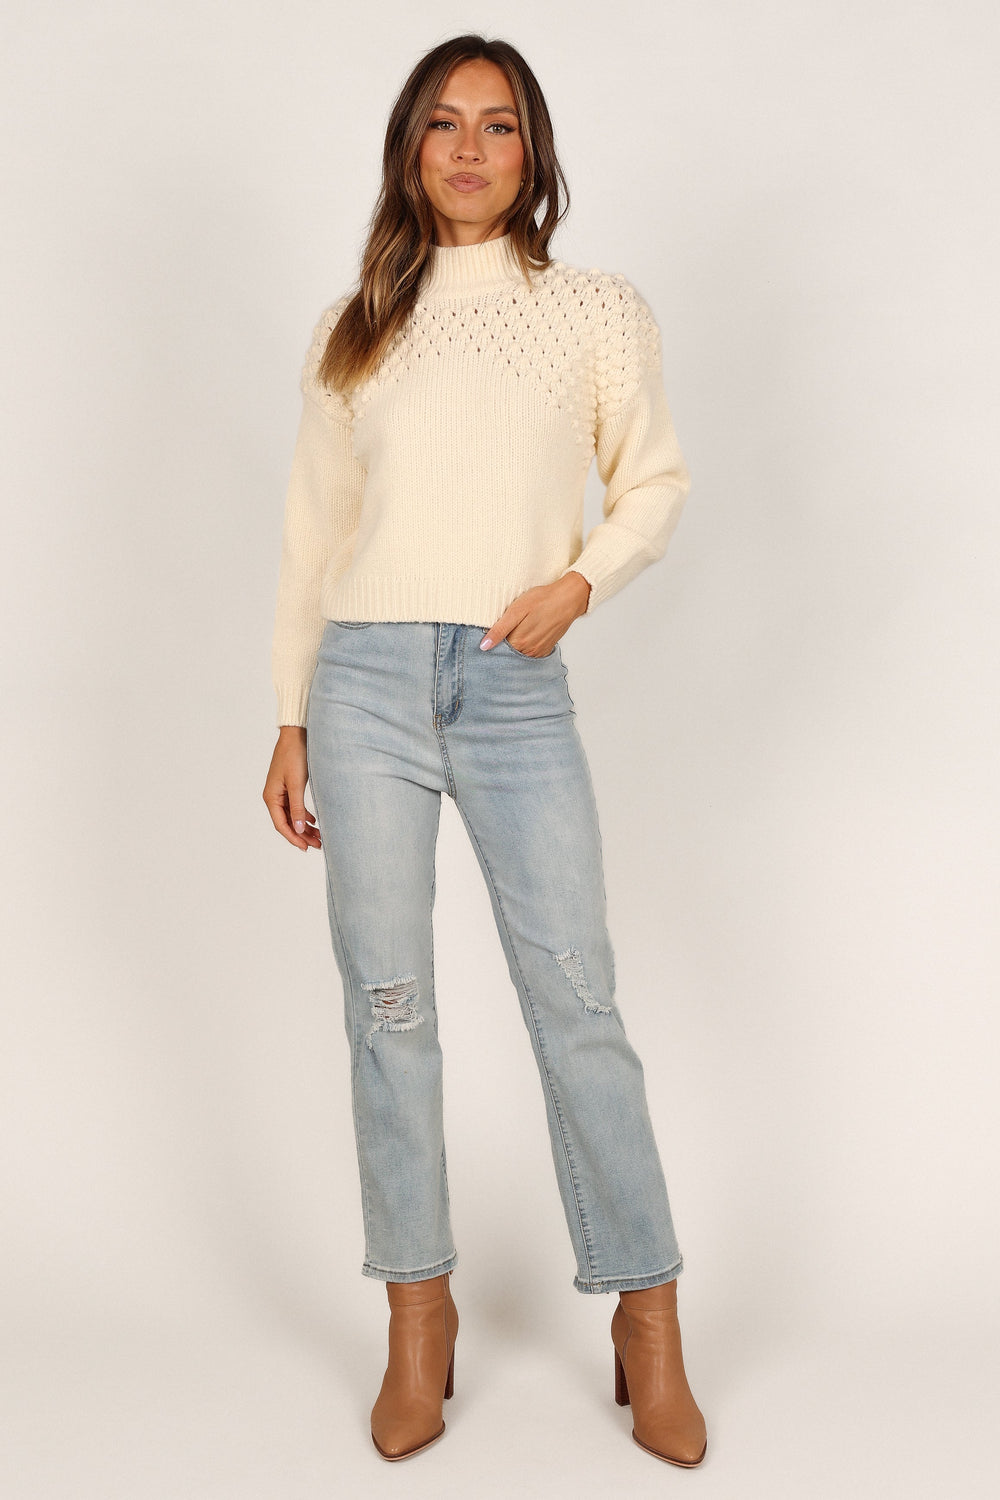 Petal and Pup USA Knitwear Mia Textured Shoulder Knit Sweater - Cream